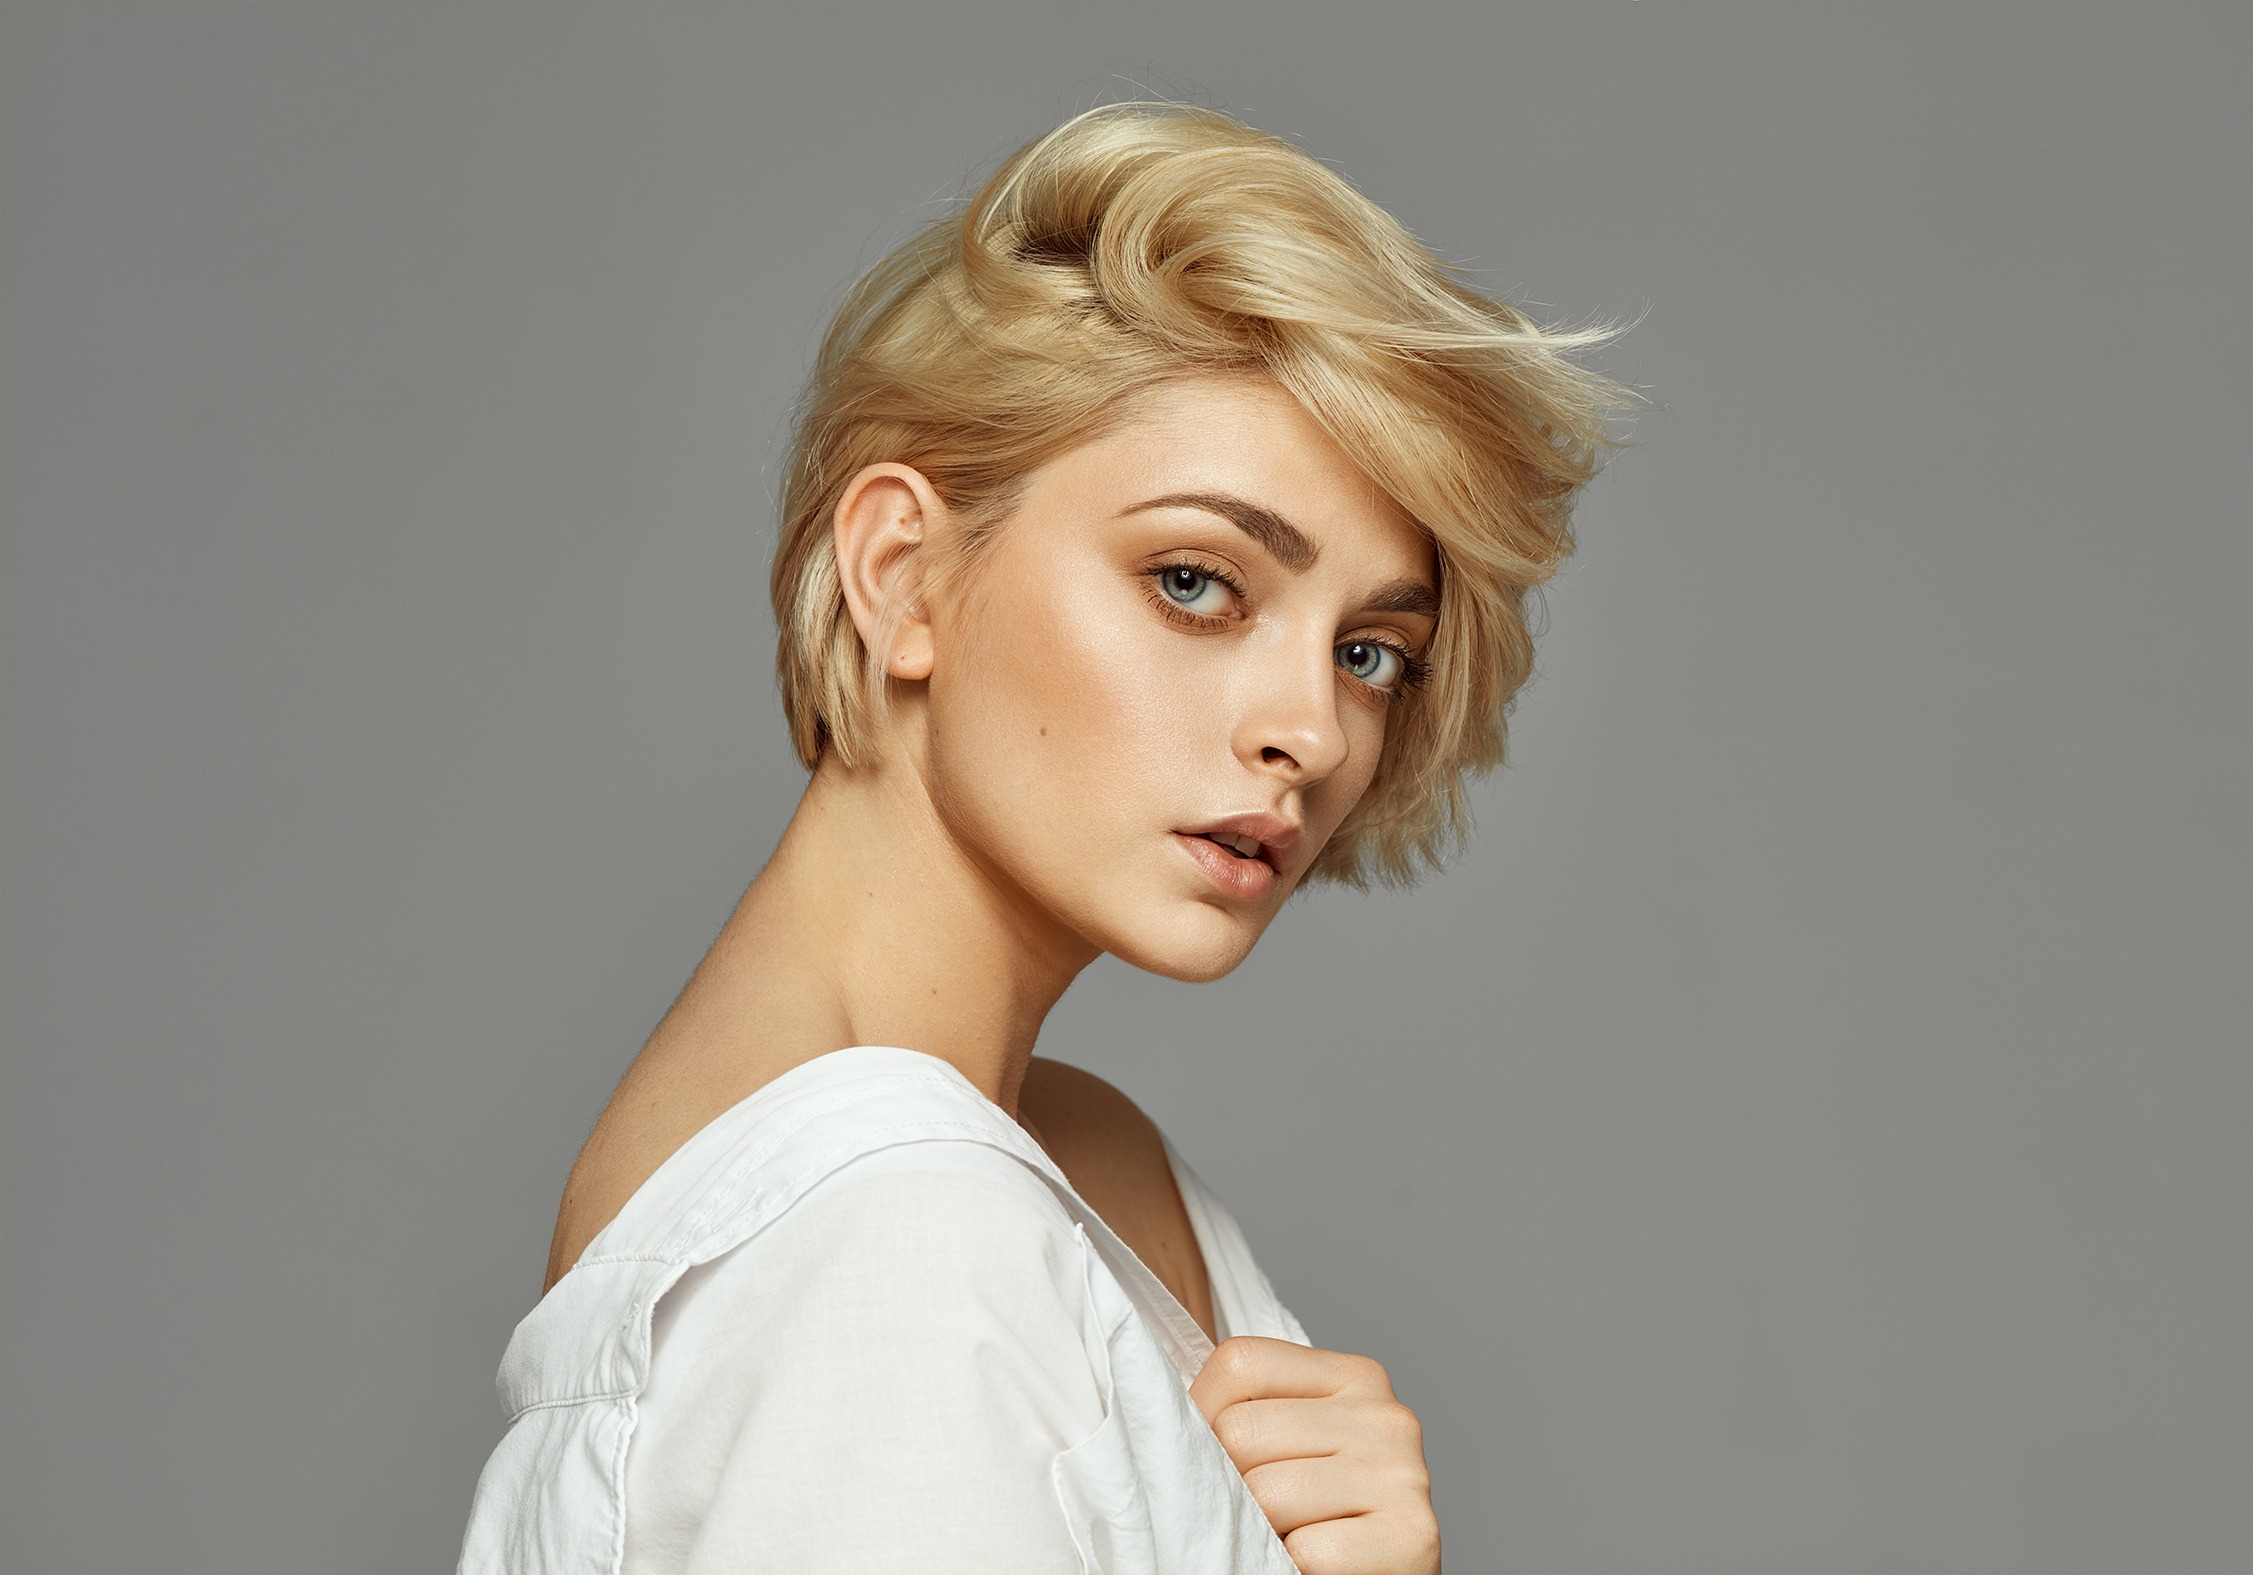 Portrait of young woman with blond short hair